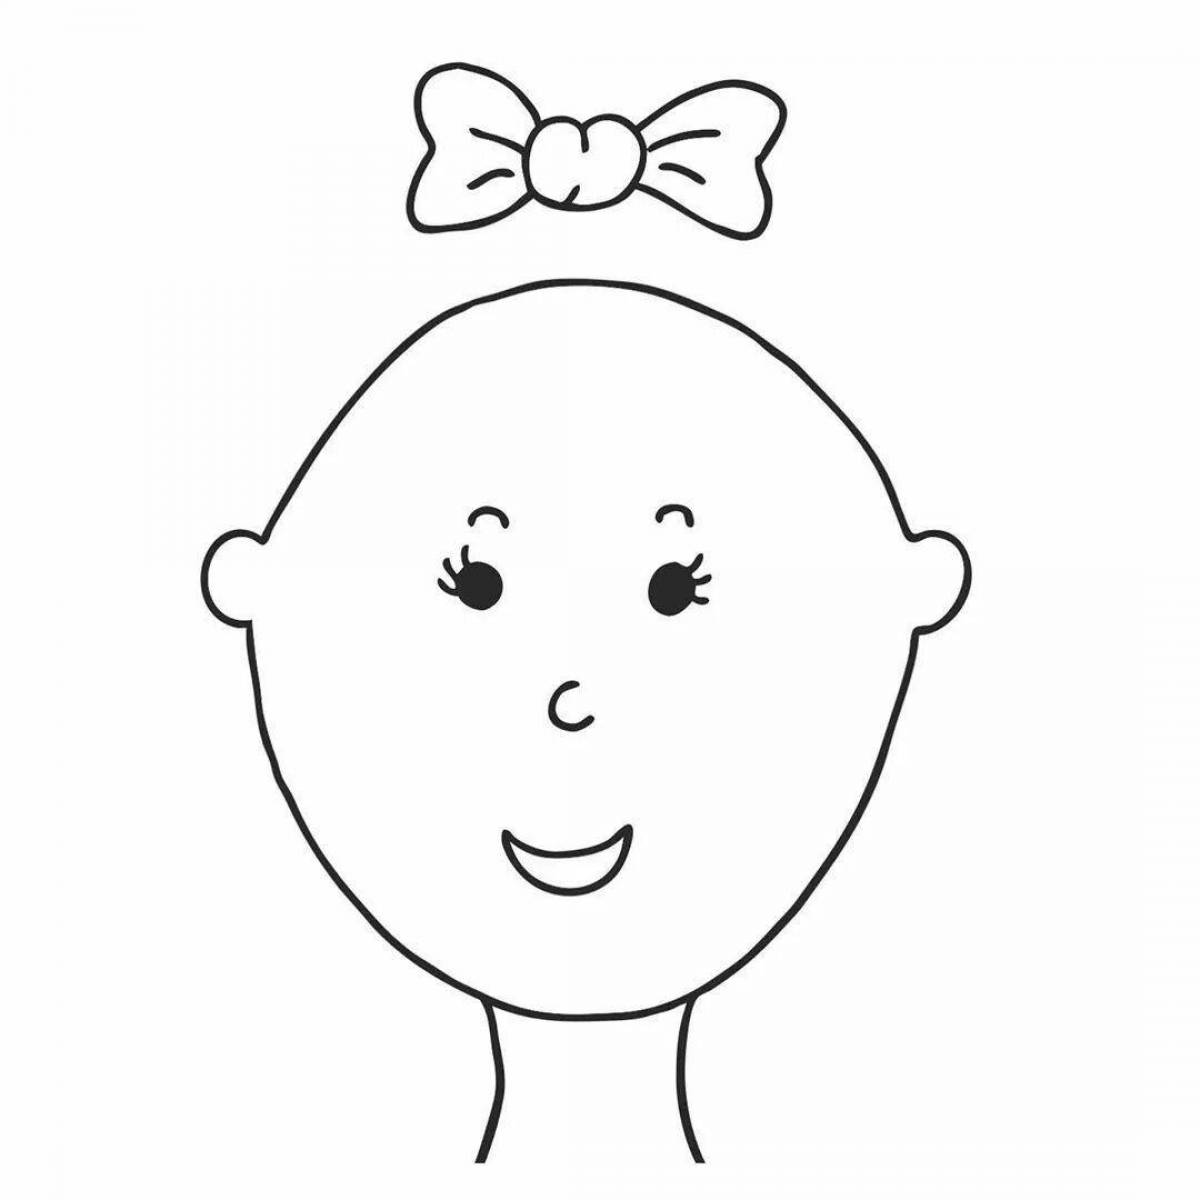 Animated hairless face coloring book for kids